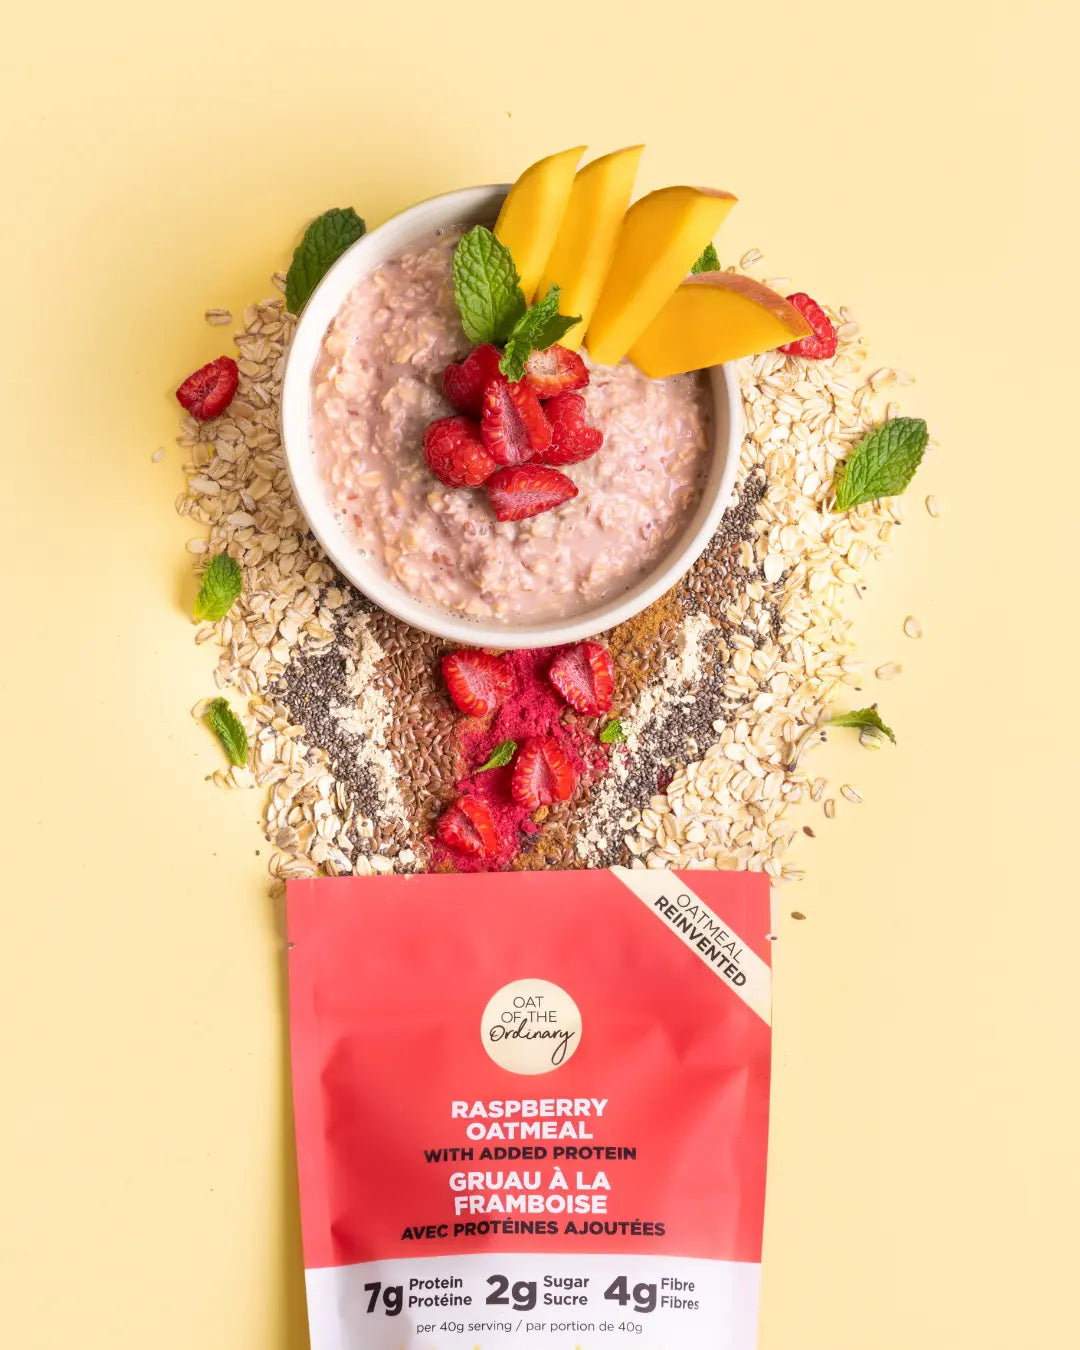 Raspberry oatmeal ingredients spilling out of a pouch surrounding a bowl of oatmeal with toppings.